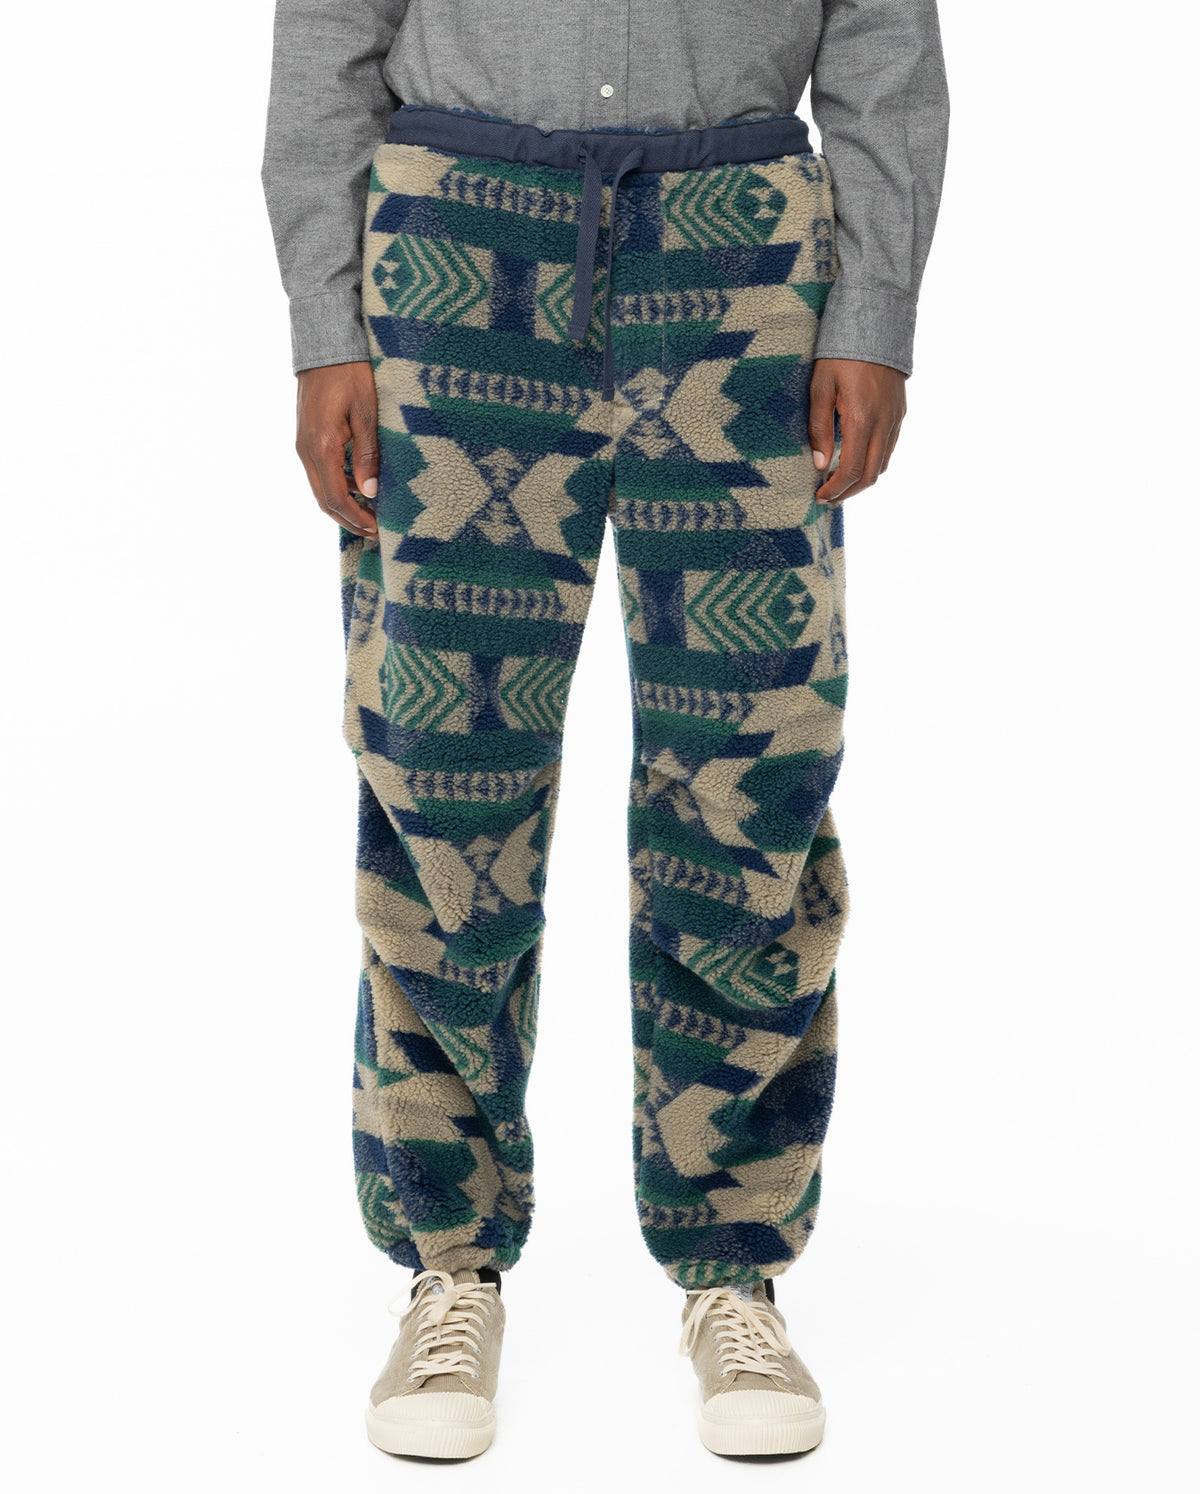 Gym Pants Wide Jacquard Boa In Navy